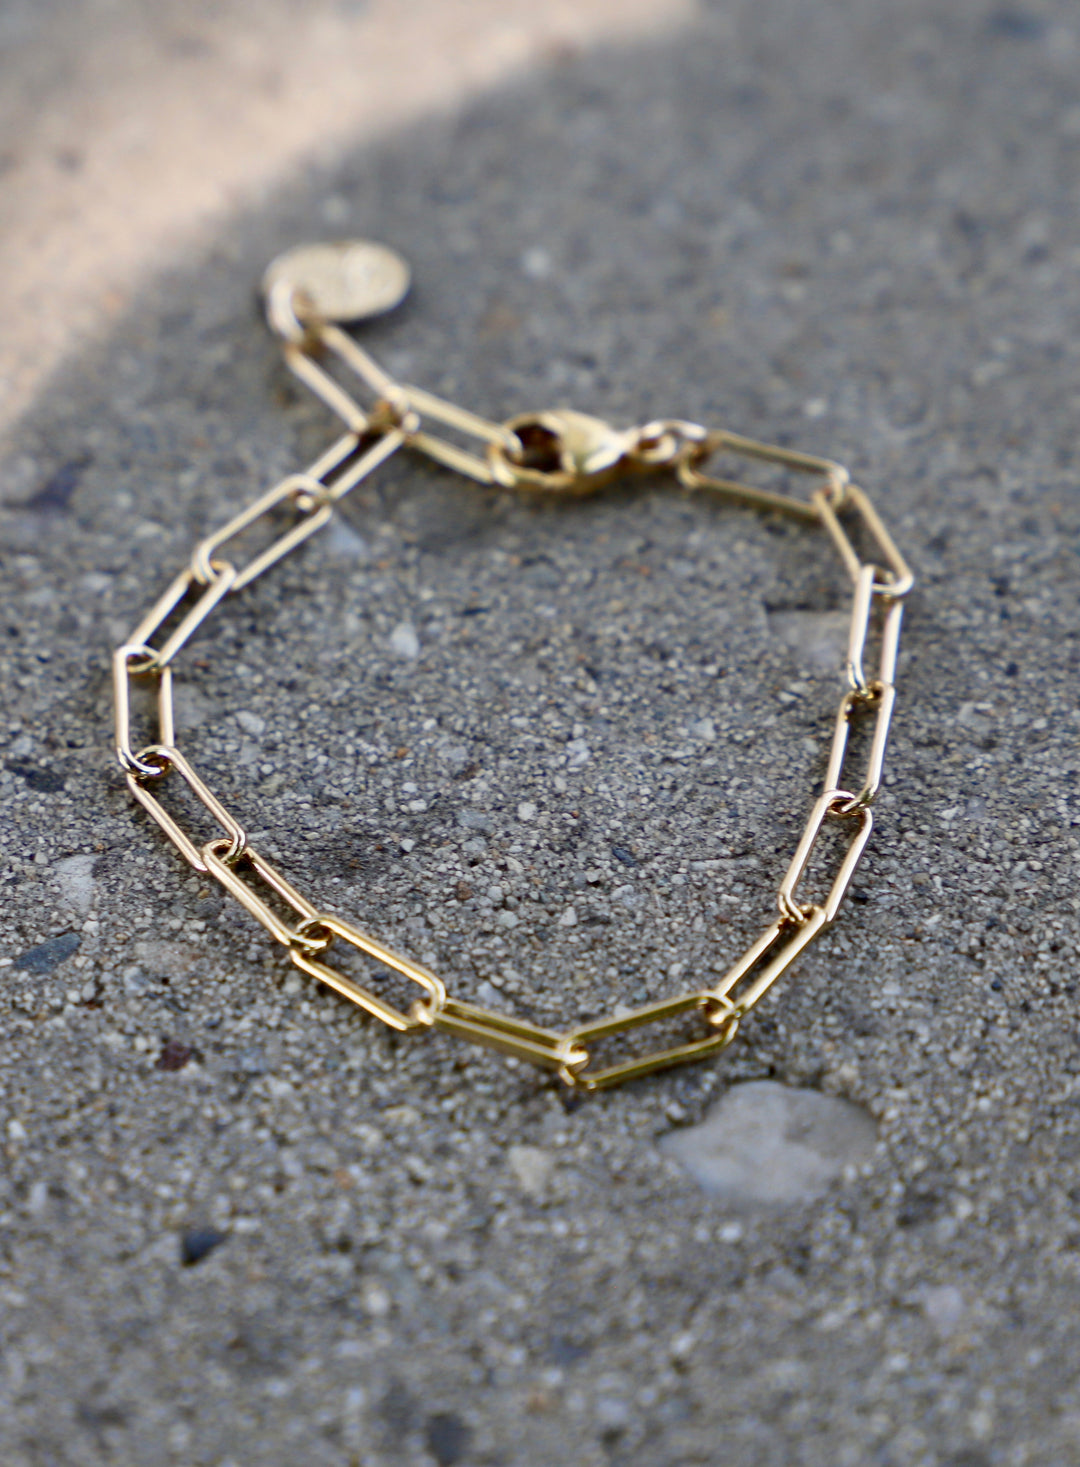 SMOOTH PAPERCLIP CHAIN BRACELET